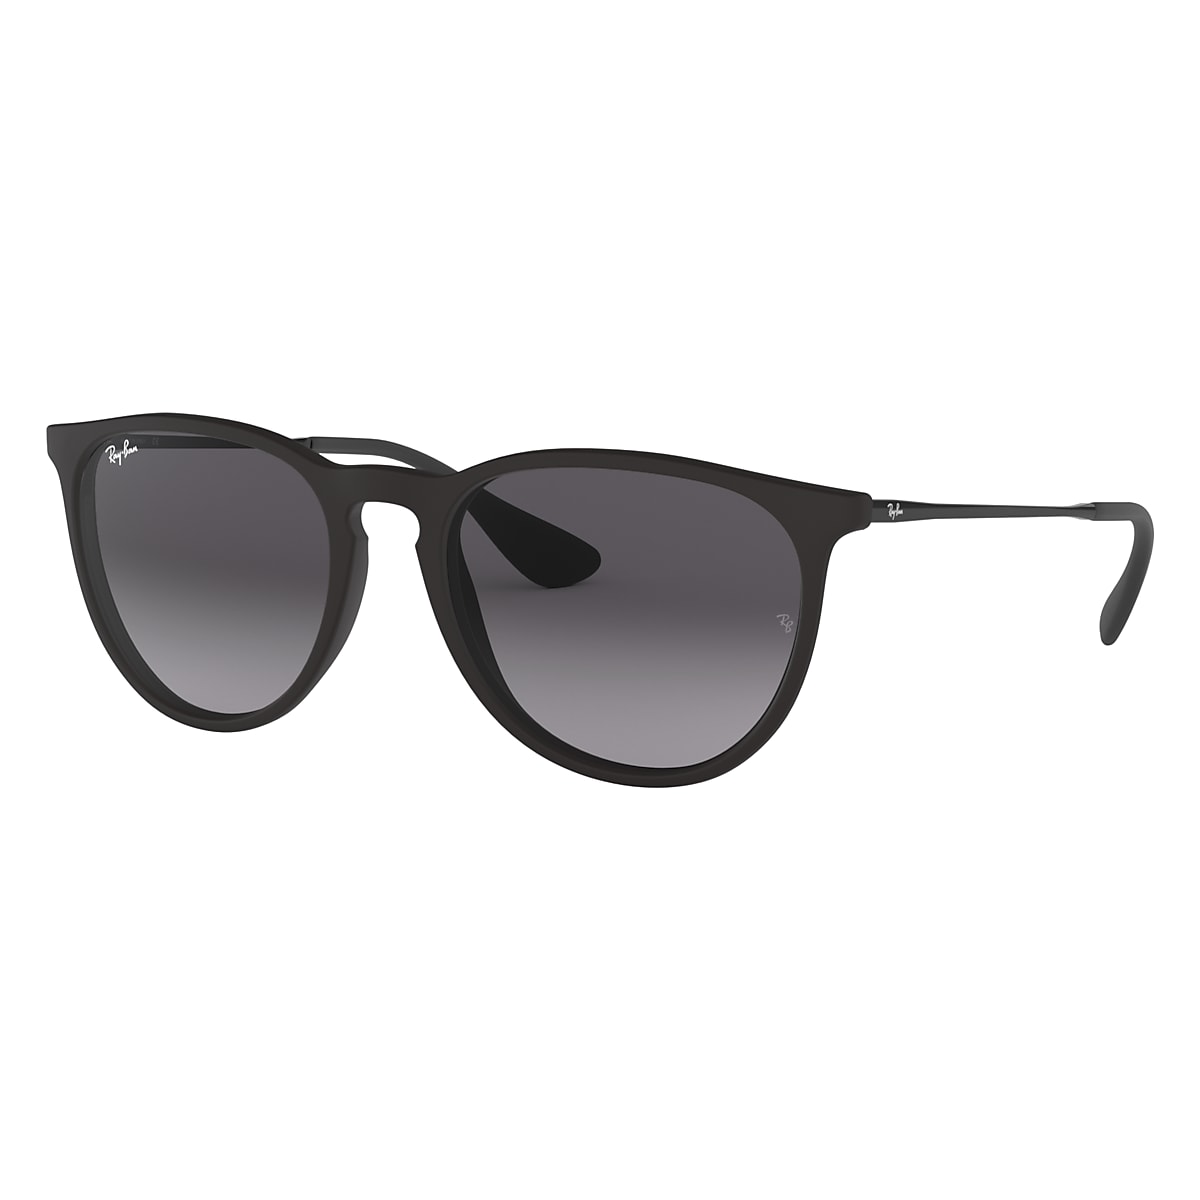 ERIKA CLASSIC Sunglasses in Black and Grey - RB4171F - Ray-Ban